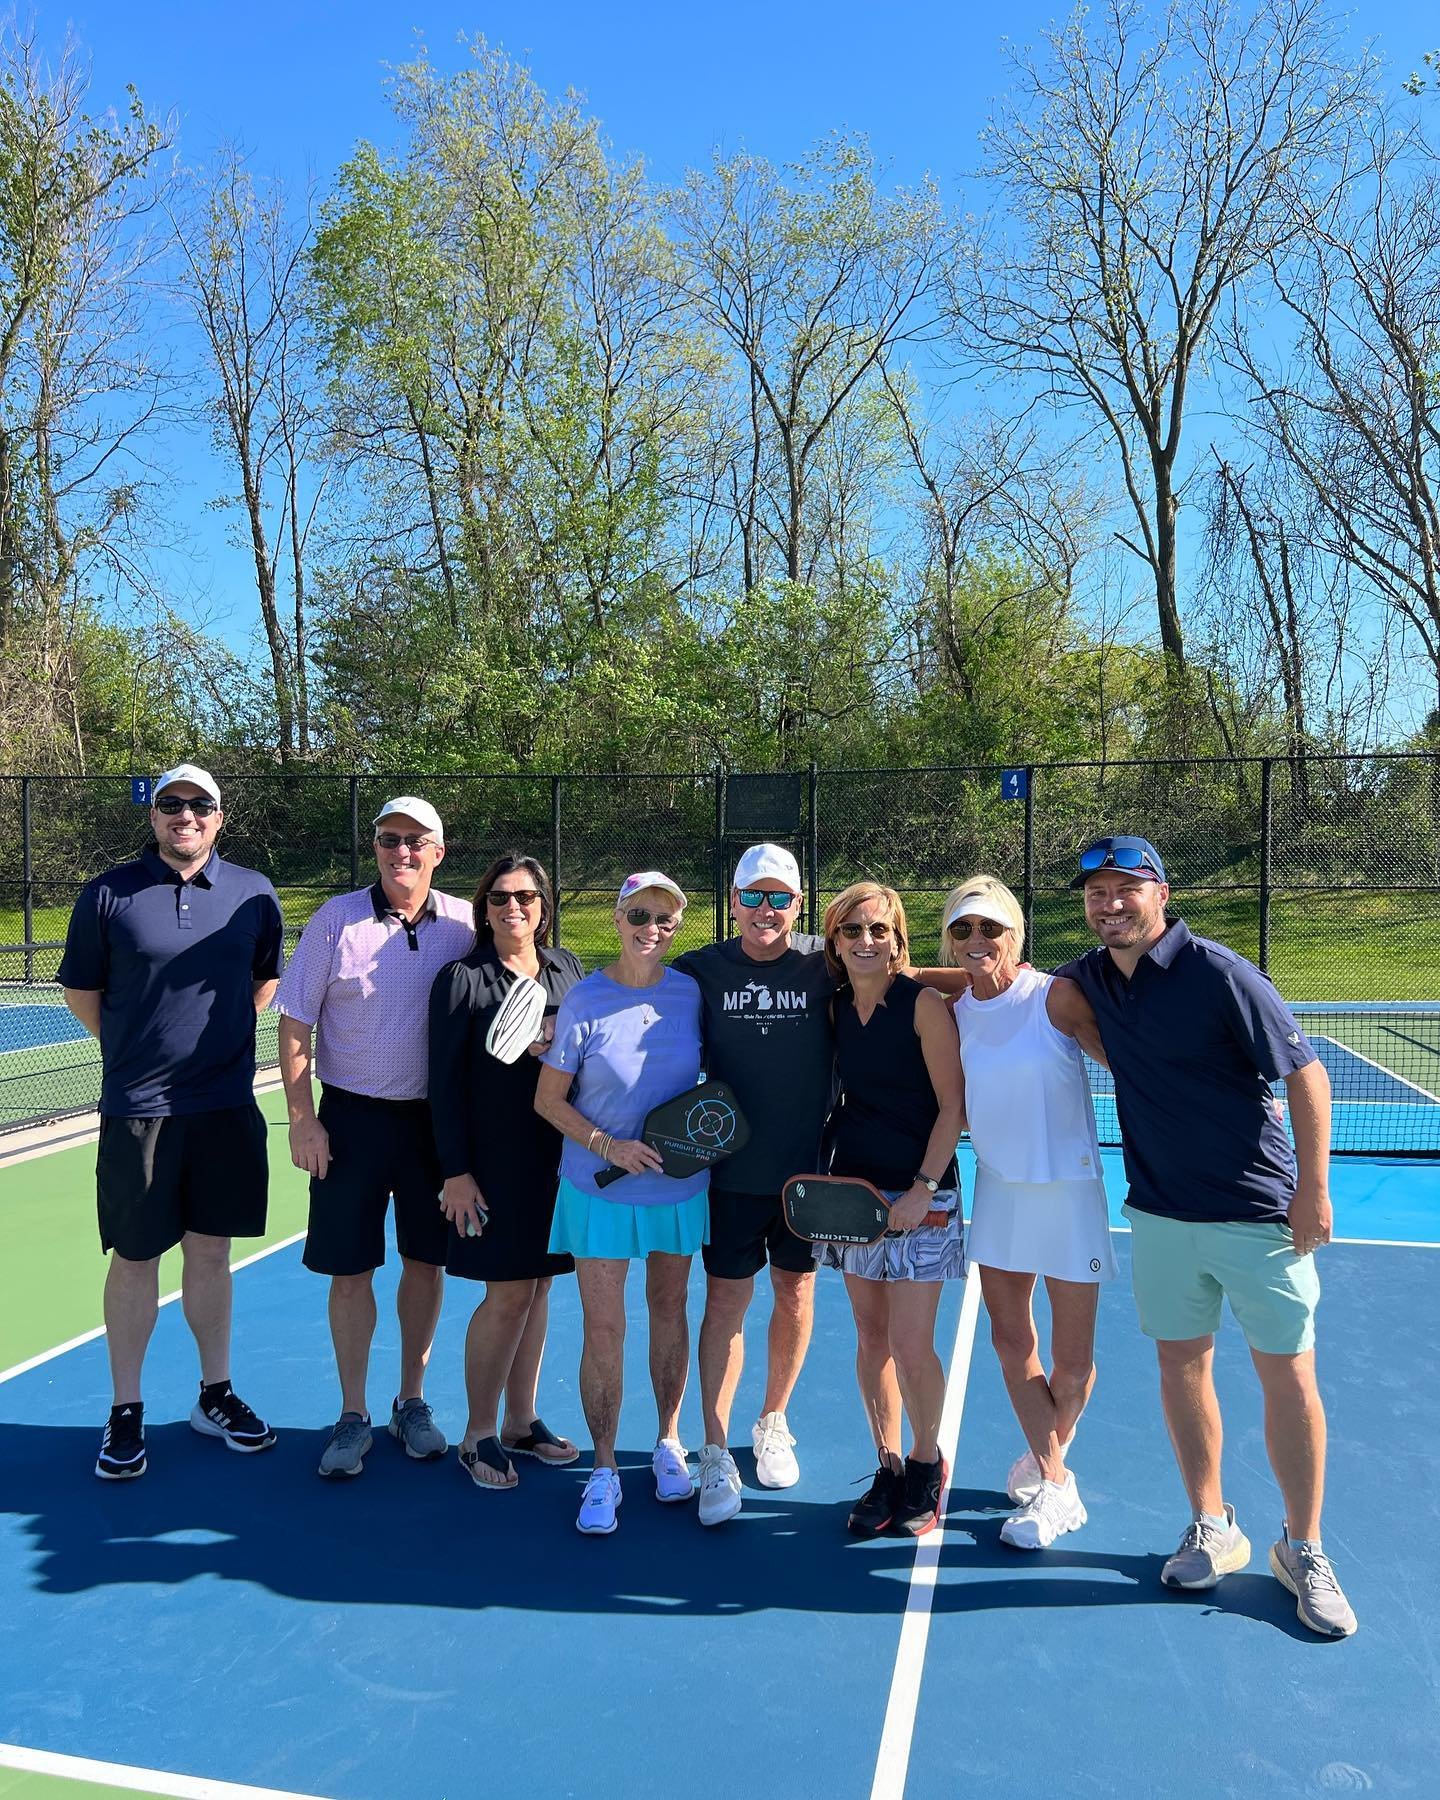 🎾Served up all the fun with our new Racquets Professional, Jimmy and his team at our Meet &amp; Greet event on Wednesday night! Thanks to our everyone who attended, making this evening a success. Members- Join us at the Racquets Opening Party to kic